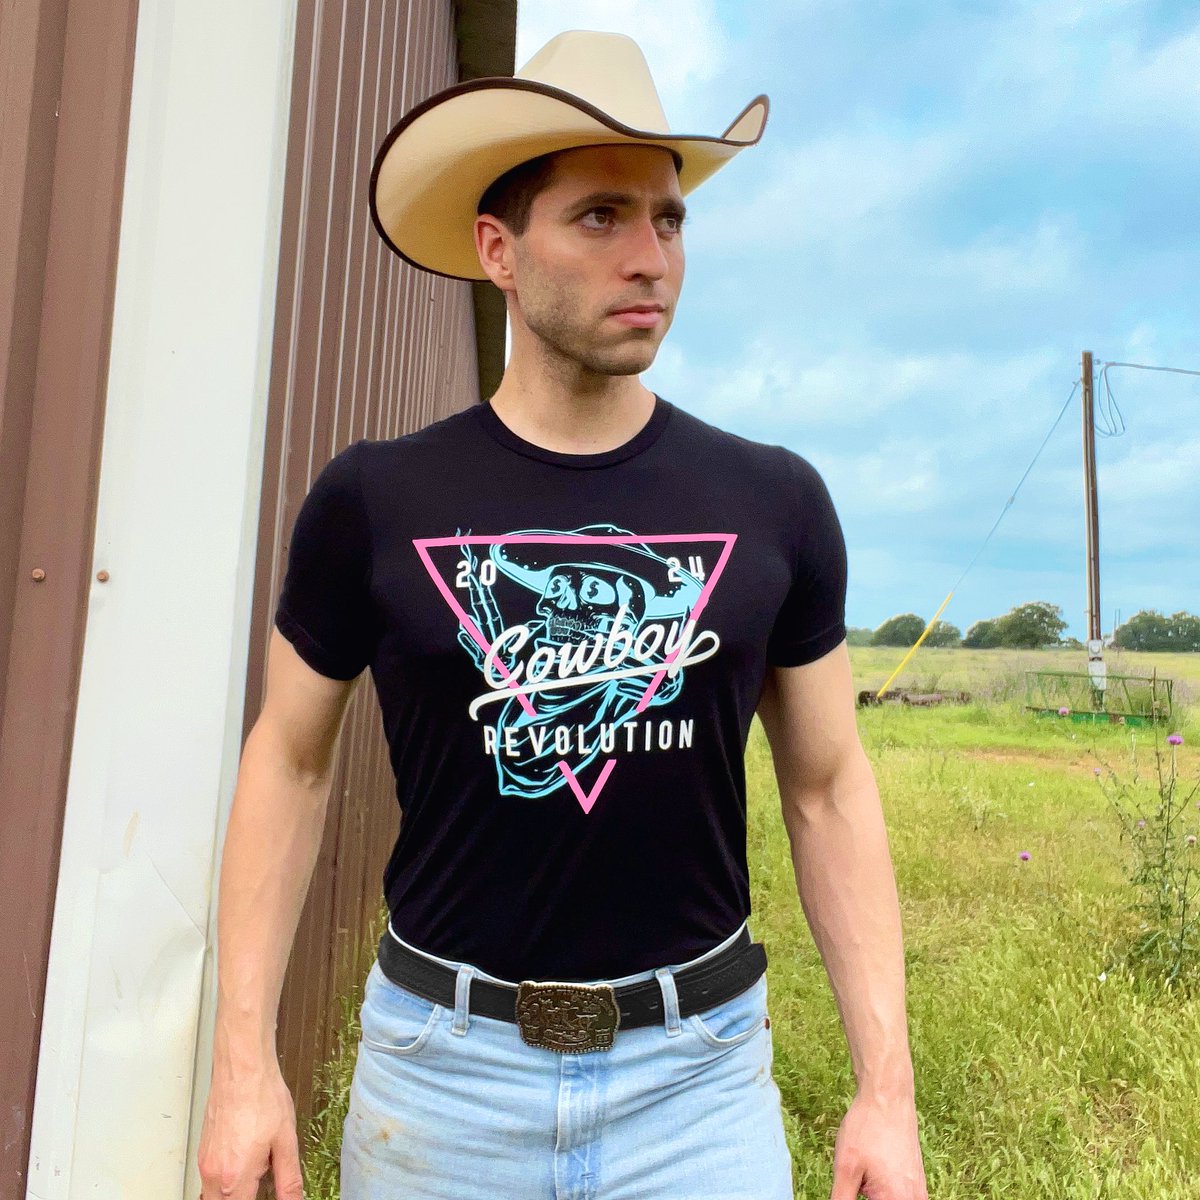 Use promo code GARRETT for 15% off when you shop @CowboyRev2012 today!

#cowboyrevolution #cowboyrevolutionapparel #garrettsmith #westernwear #westernstyle #country #countryboy #boots #hat #jeans